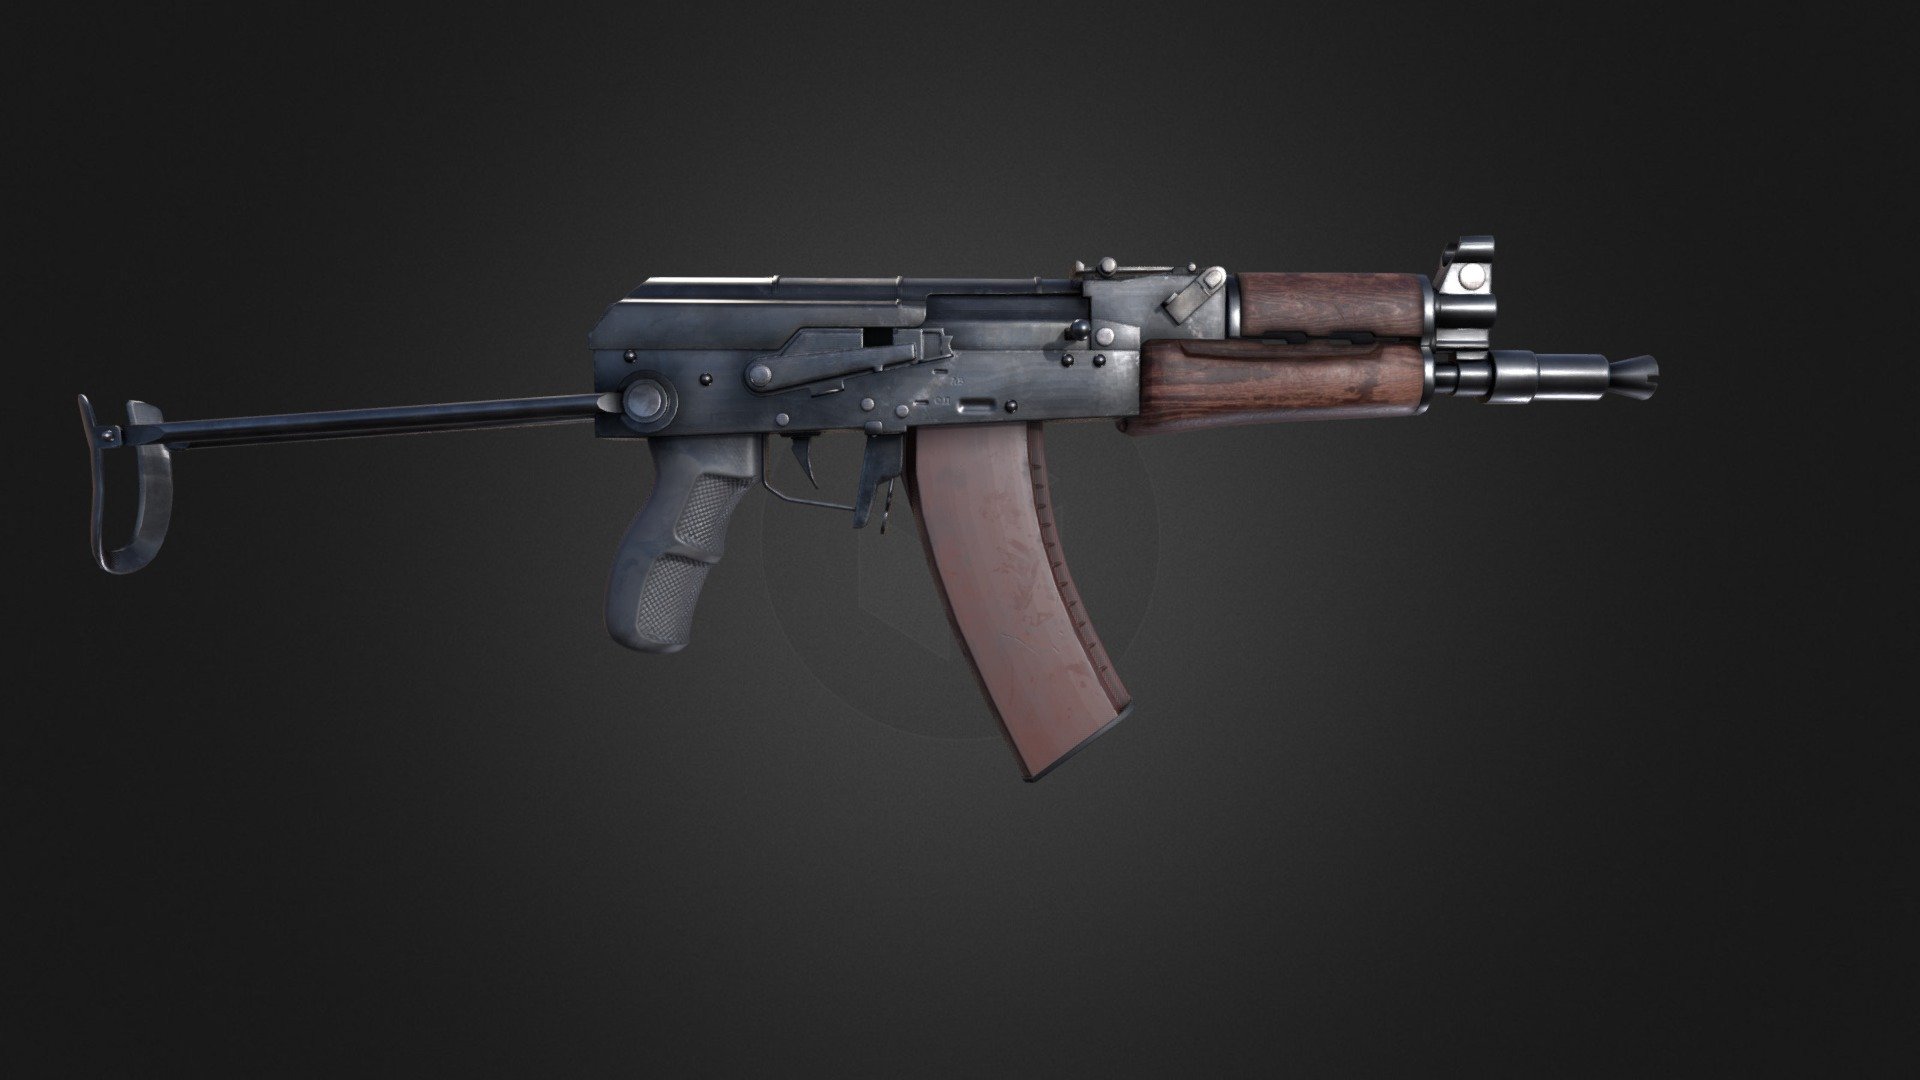 AK-74 Kalashnikov




Handguard and Stock interchangeable, 2 variations of each and 2 Materials for Stock n°0

1 PBR Material for each parts (Stock, Handguard, Platform)

2k textures as .png (OpenGL and DirectX normal map)

4 different Meshes : AK Platform (7 269f), AK Magazine (718f), Handguard n°0 (2 414f), Handguard n°1 (12 936f), Stock n°0 (2 534f), Stock n°1 (1 296f)

Entirely rigged on Blender 4.0 using Bones and Emptys (as controllers)

9 Controllers to animate 9 Parts (Adjust and Rotate Sight, Magazine, Release, Slider, Stock Rotate, Switch, Trigger, Main)

Game Ready

Blender Files with imported and rigged model, .fbx model without rigg and textures files attached (contains explanations for animation export and textures import)

More visuals here ! https://captainalexio.artstation.com/projects/RyonYX

*xxxf = number of faces as triangles - AK-74 - 5.45 x 39 mm - Modular - Buy Royalty Free 3D model by Alexio31 3d model